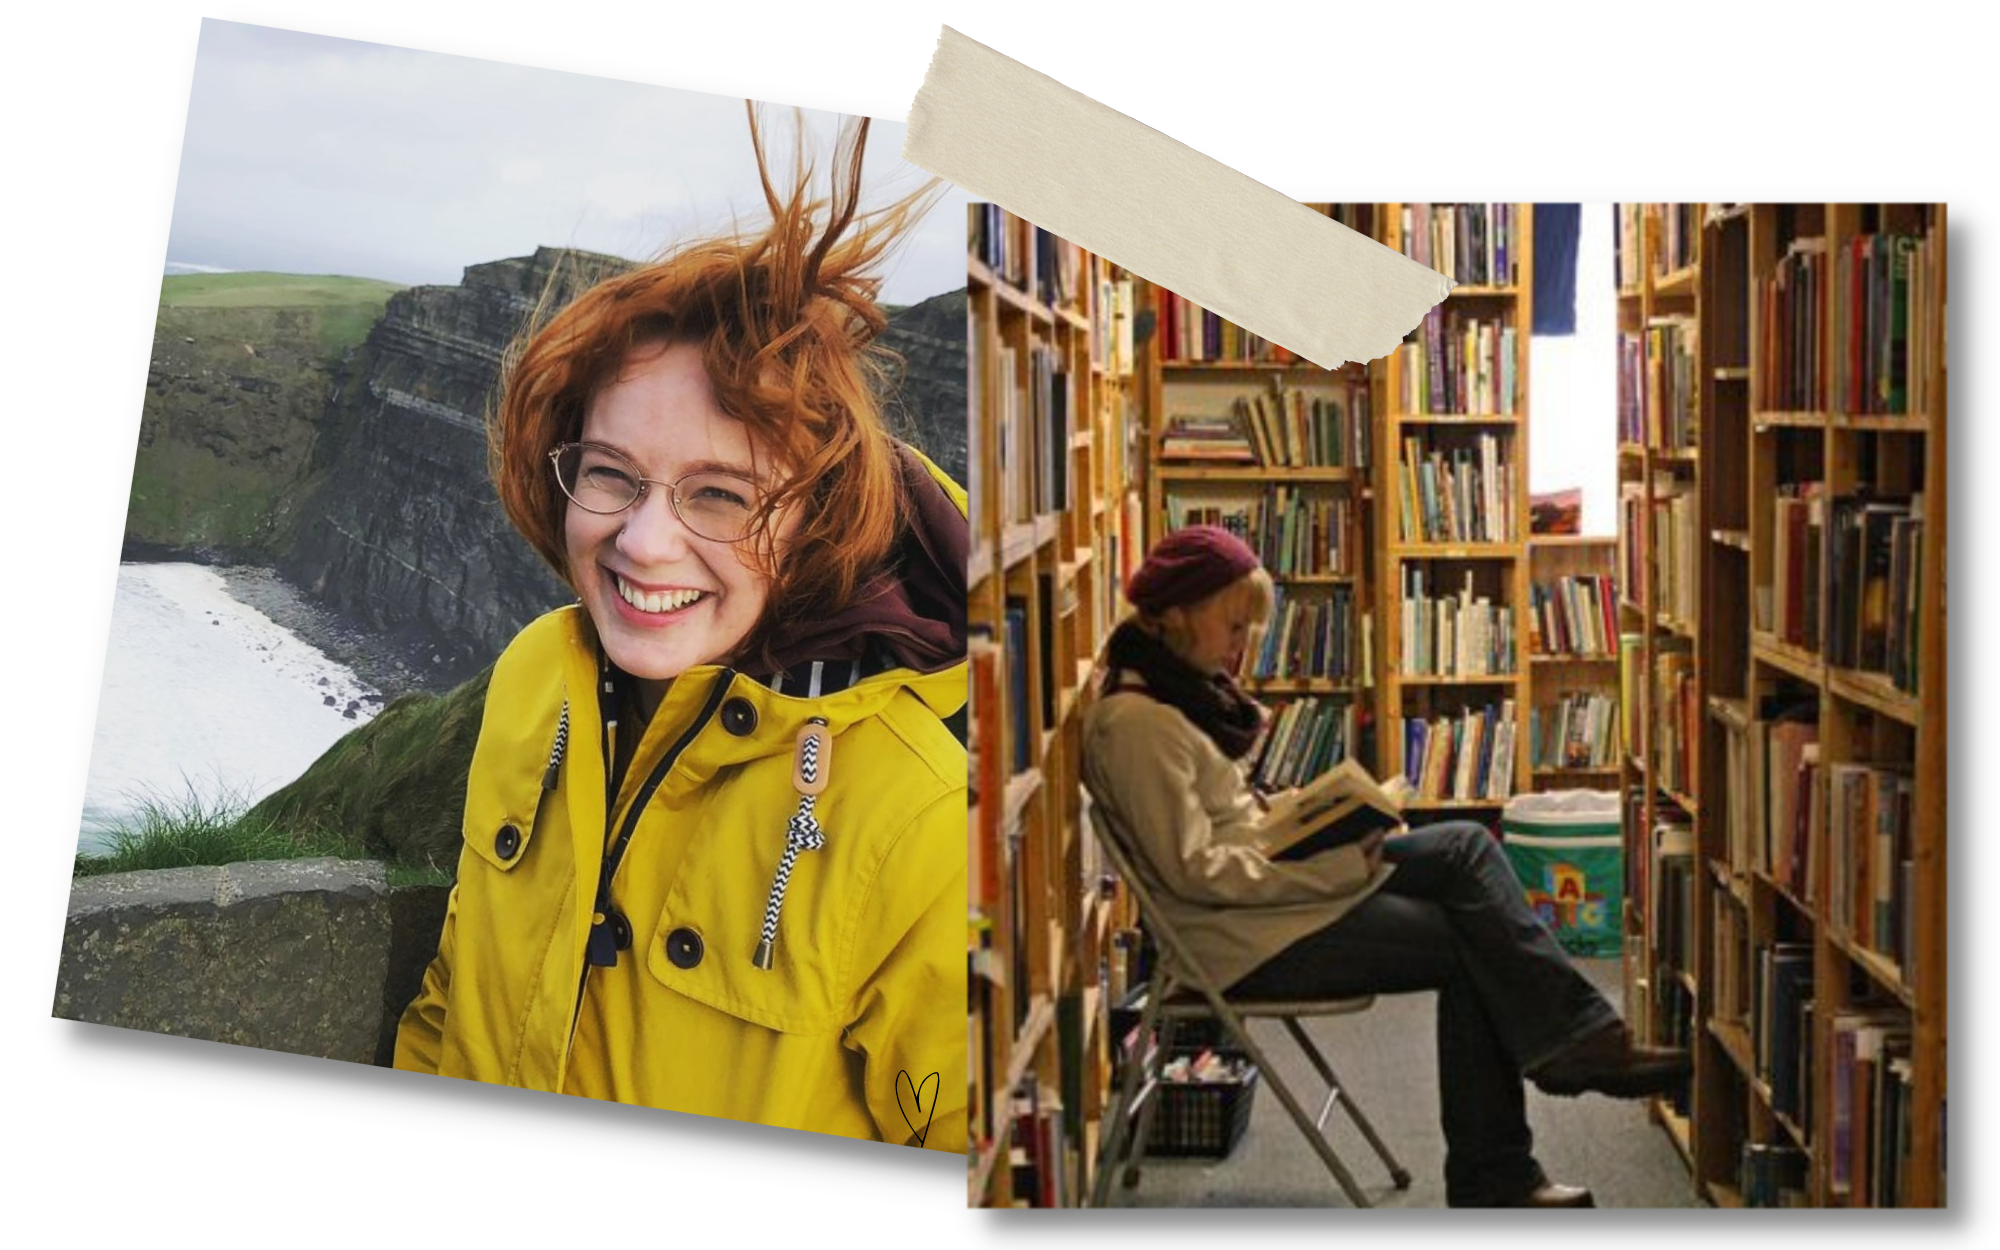 Two photos. One of Alyssa in a yellow raincoat at the Cliffs of Moher, and one of her sitting reading in a bookstore.